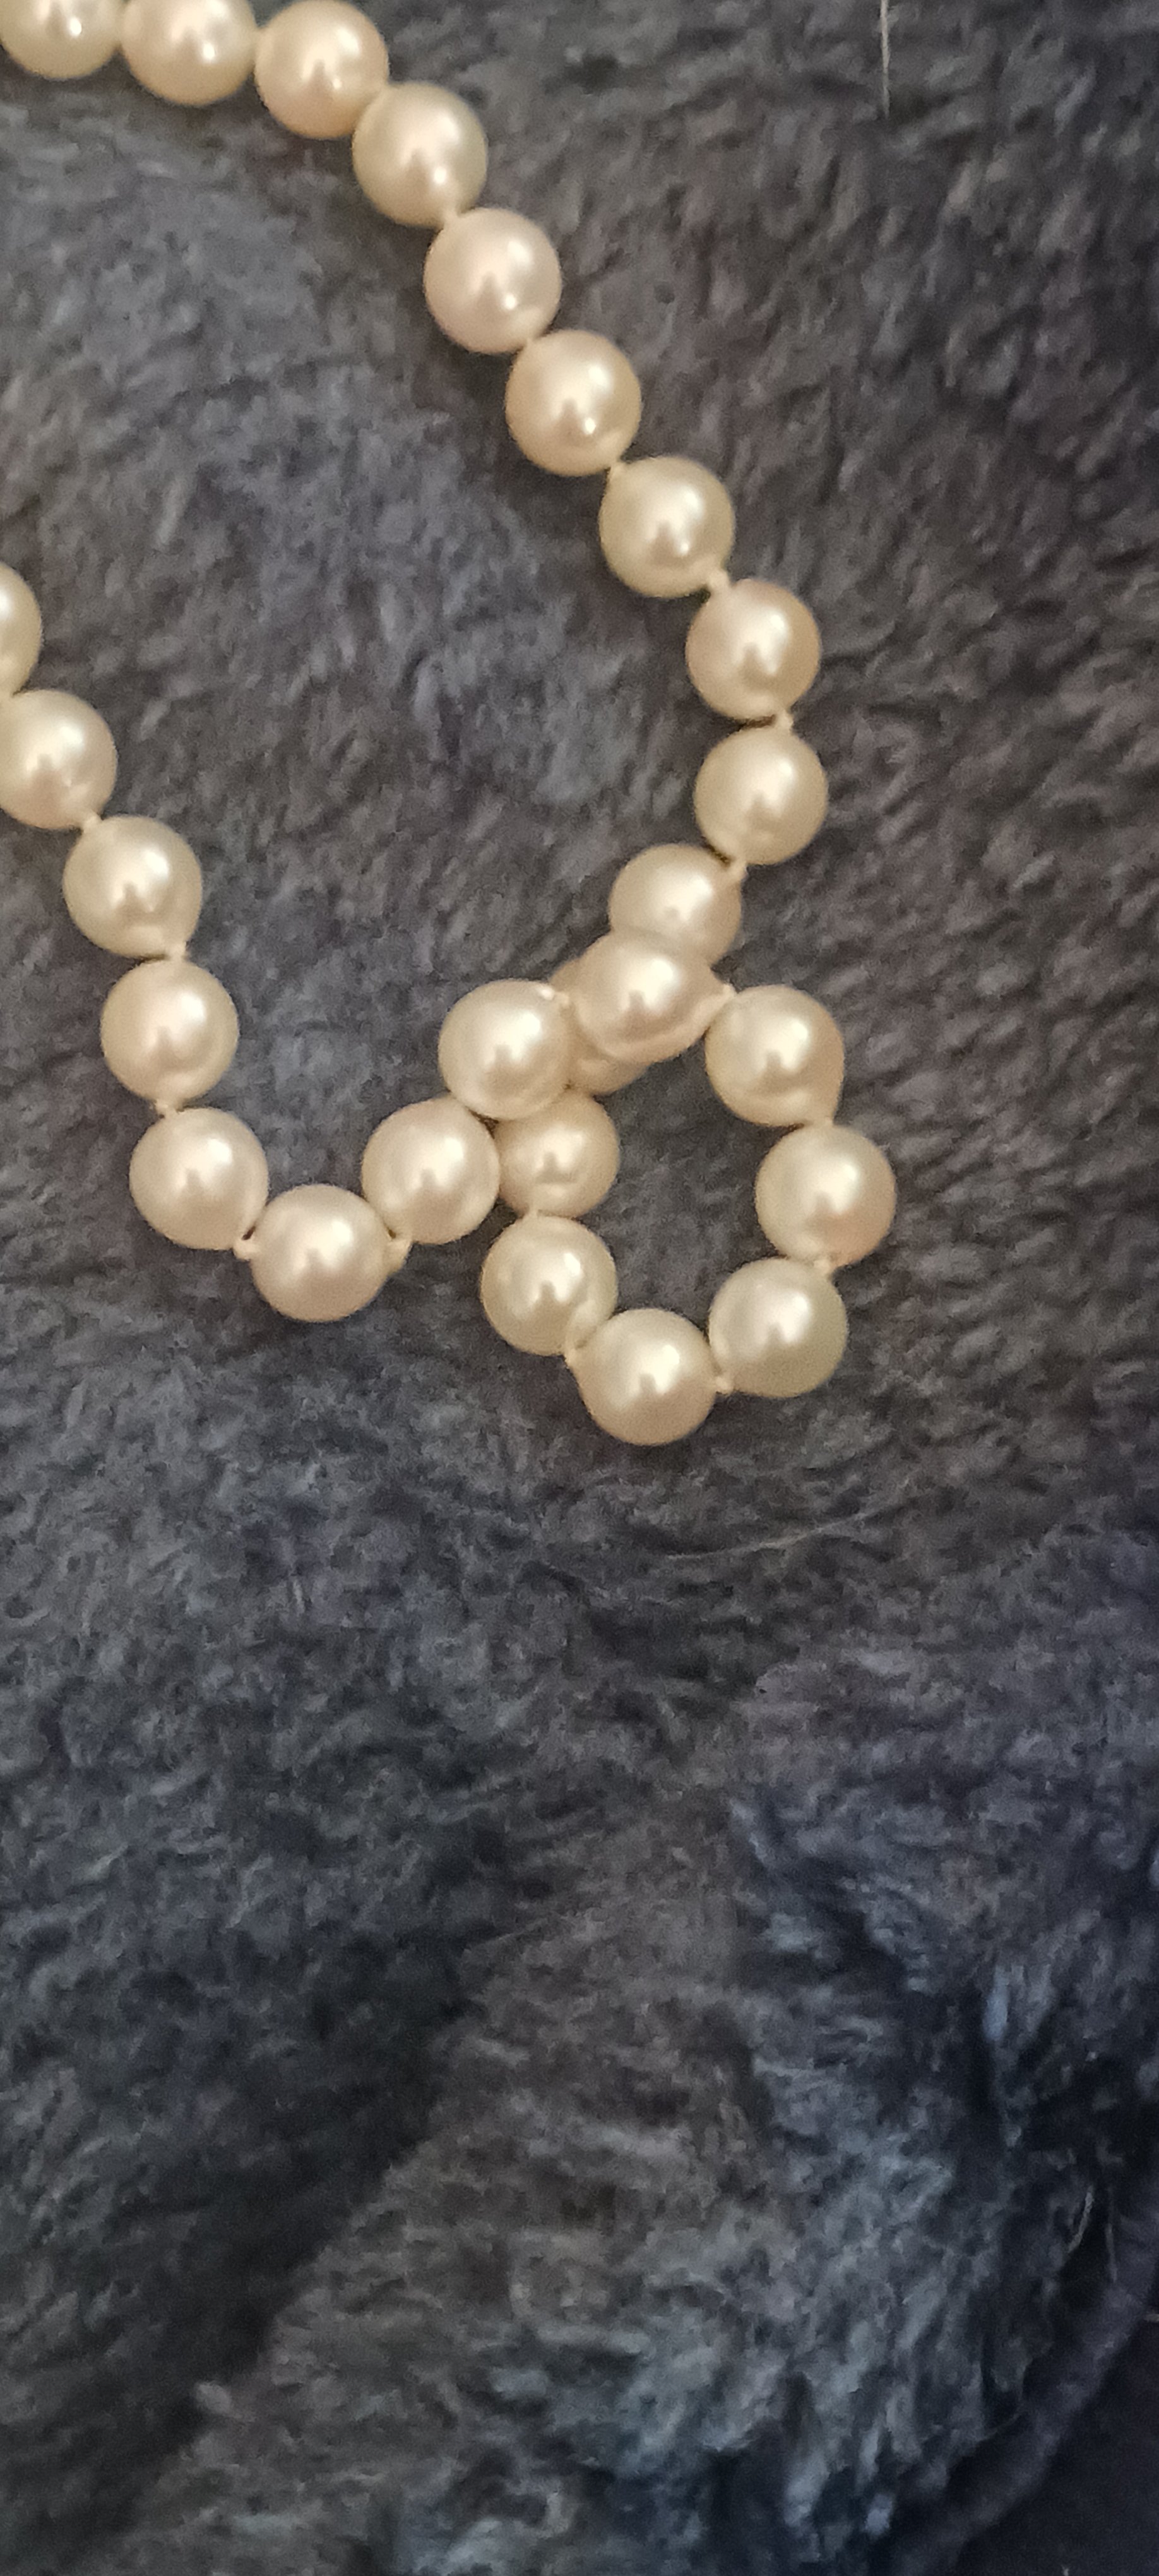 Please help identifying stamp on culture pearl clasp